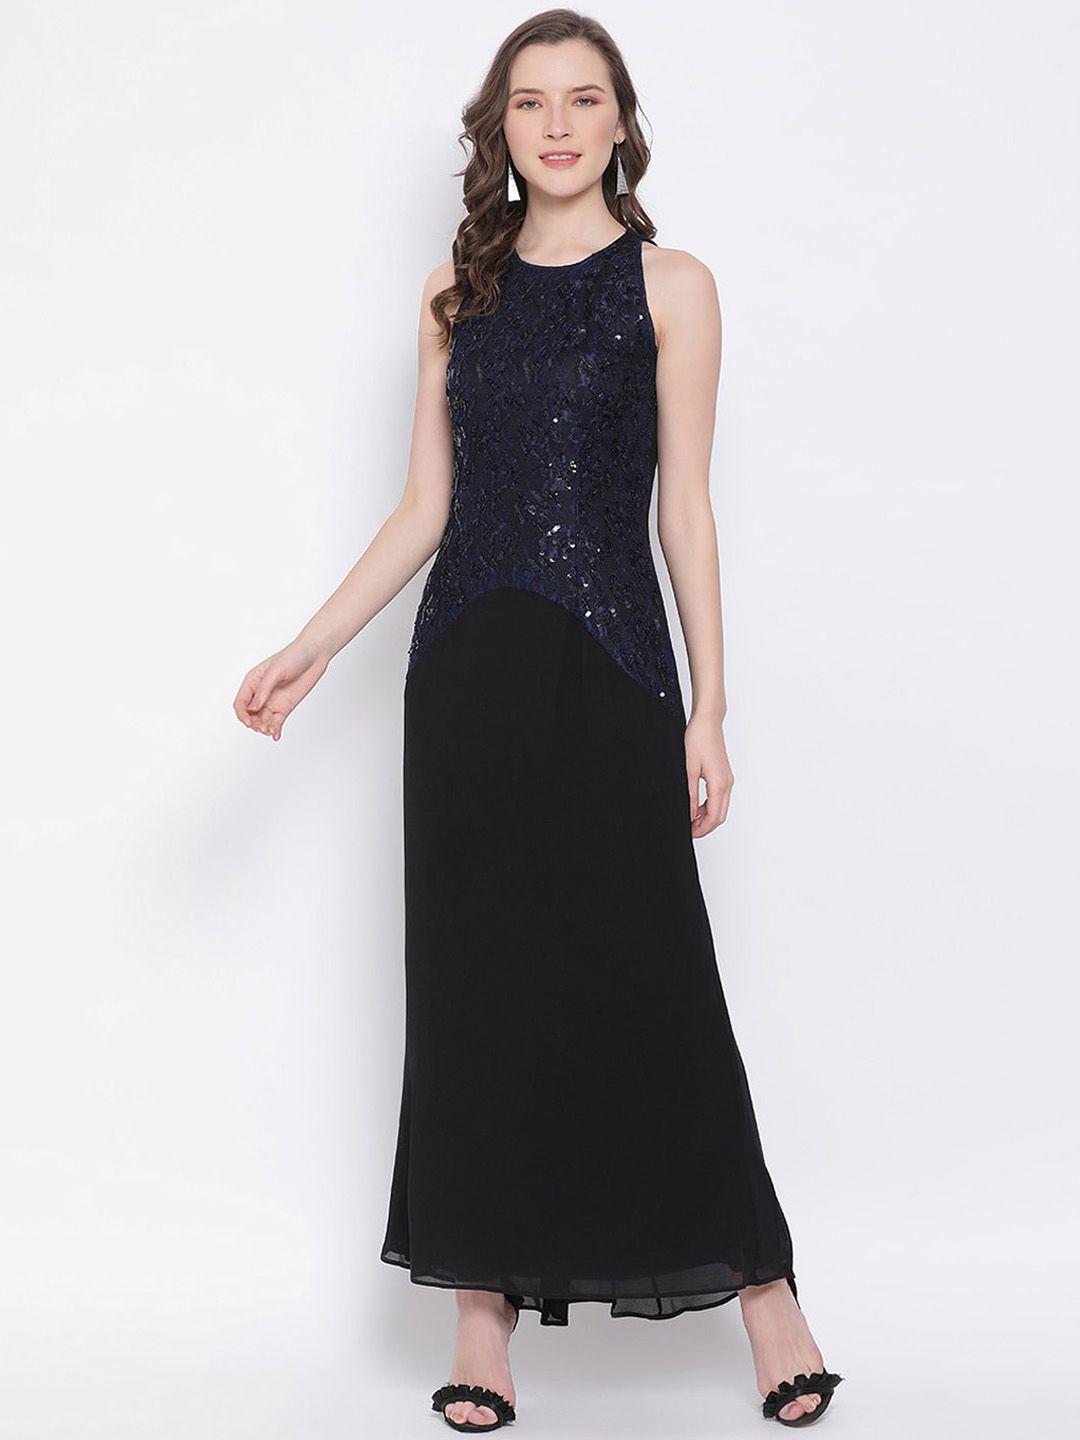 ly2 women black & navy blue sequinned lace maxi dress